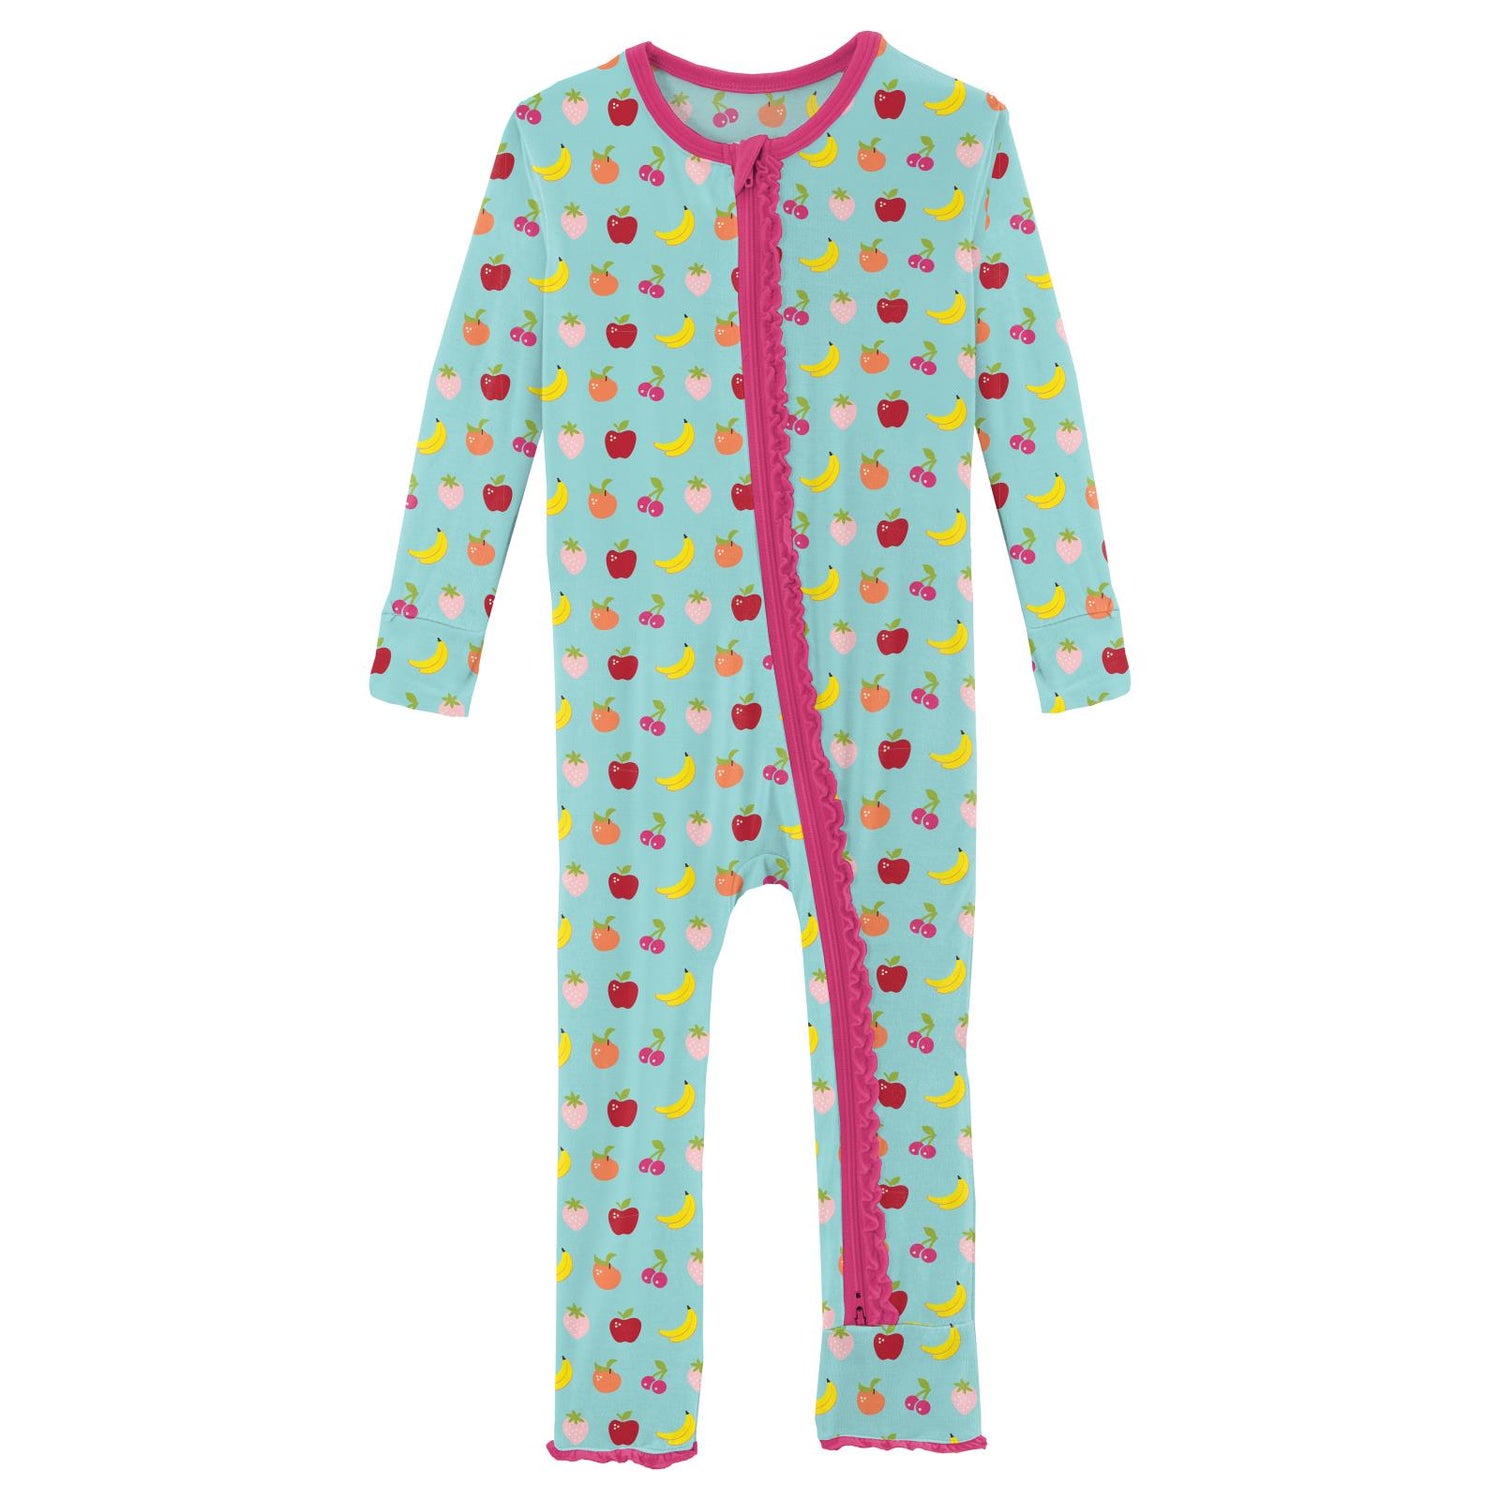 Print Muffin Ruffle Coverall with 2 Way Zipper in Summer Sky Mini Fruit